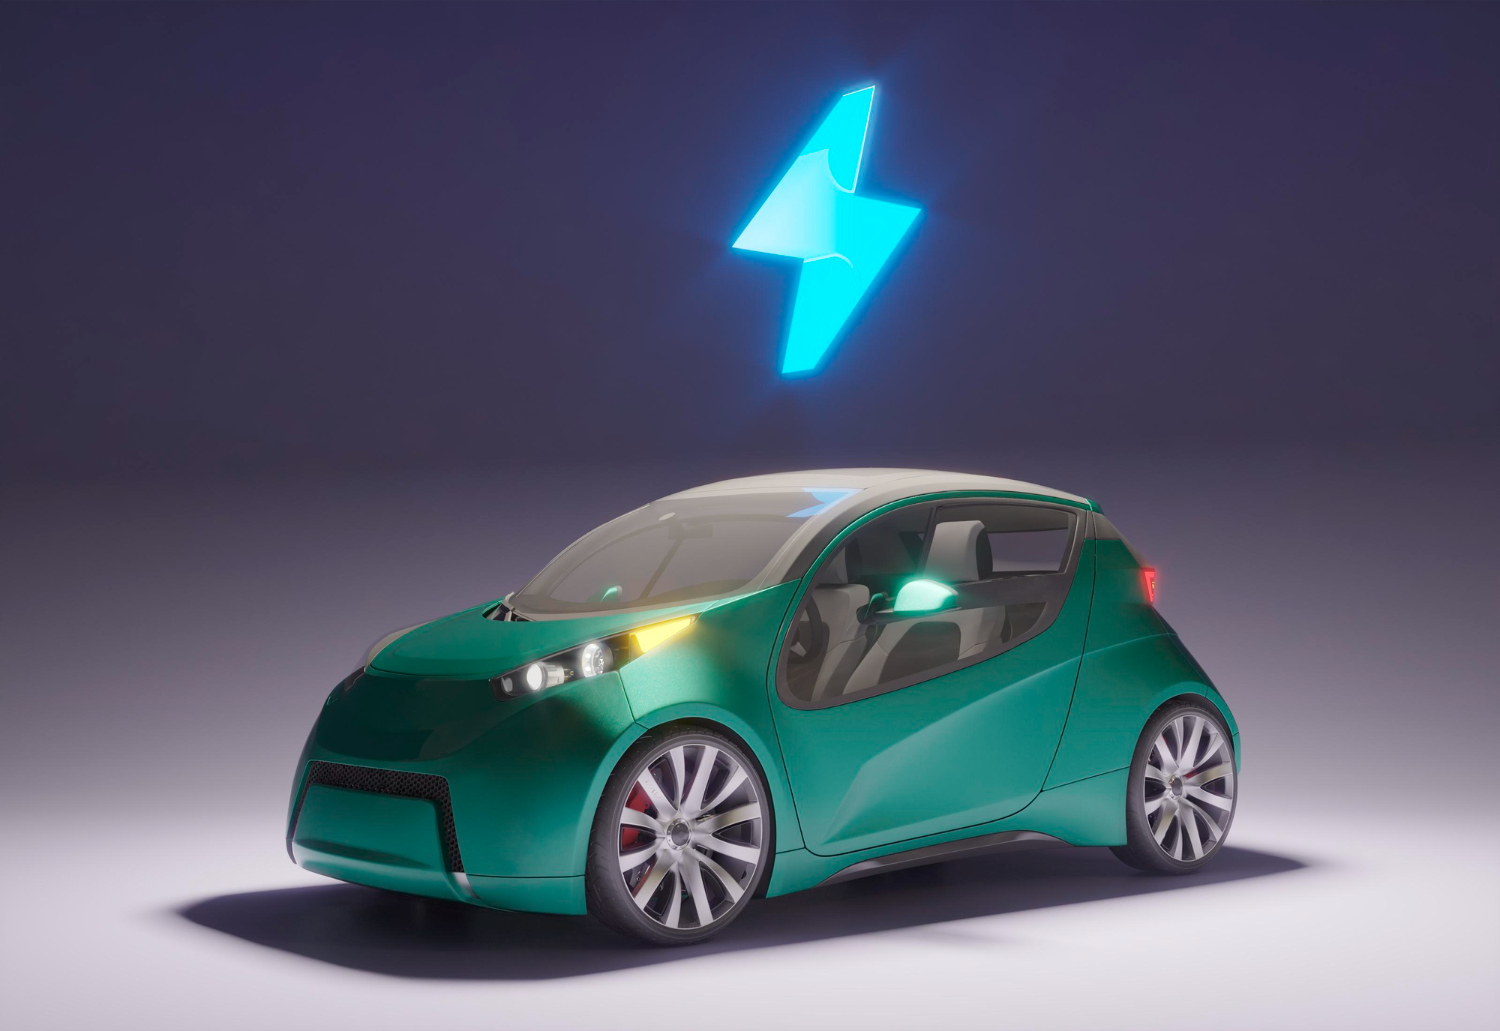 Rev Up Your Ride – The Kilowatt Chronicles for EV Enthusiasts